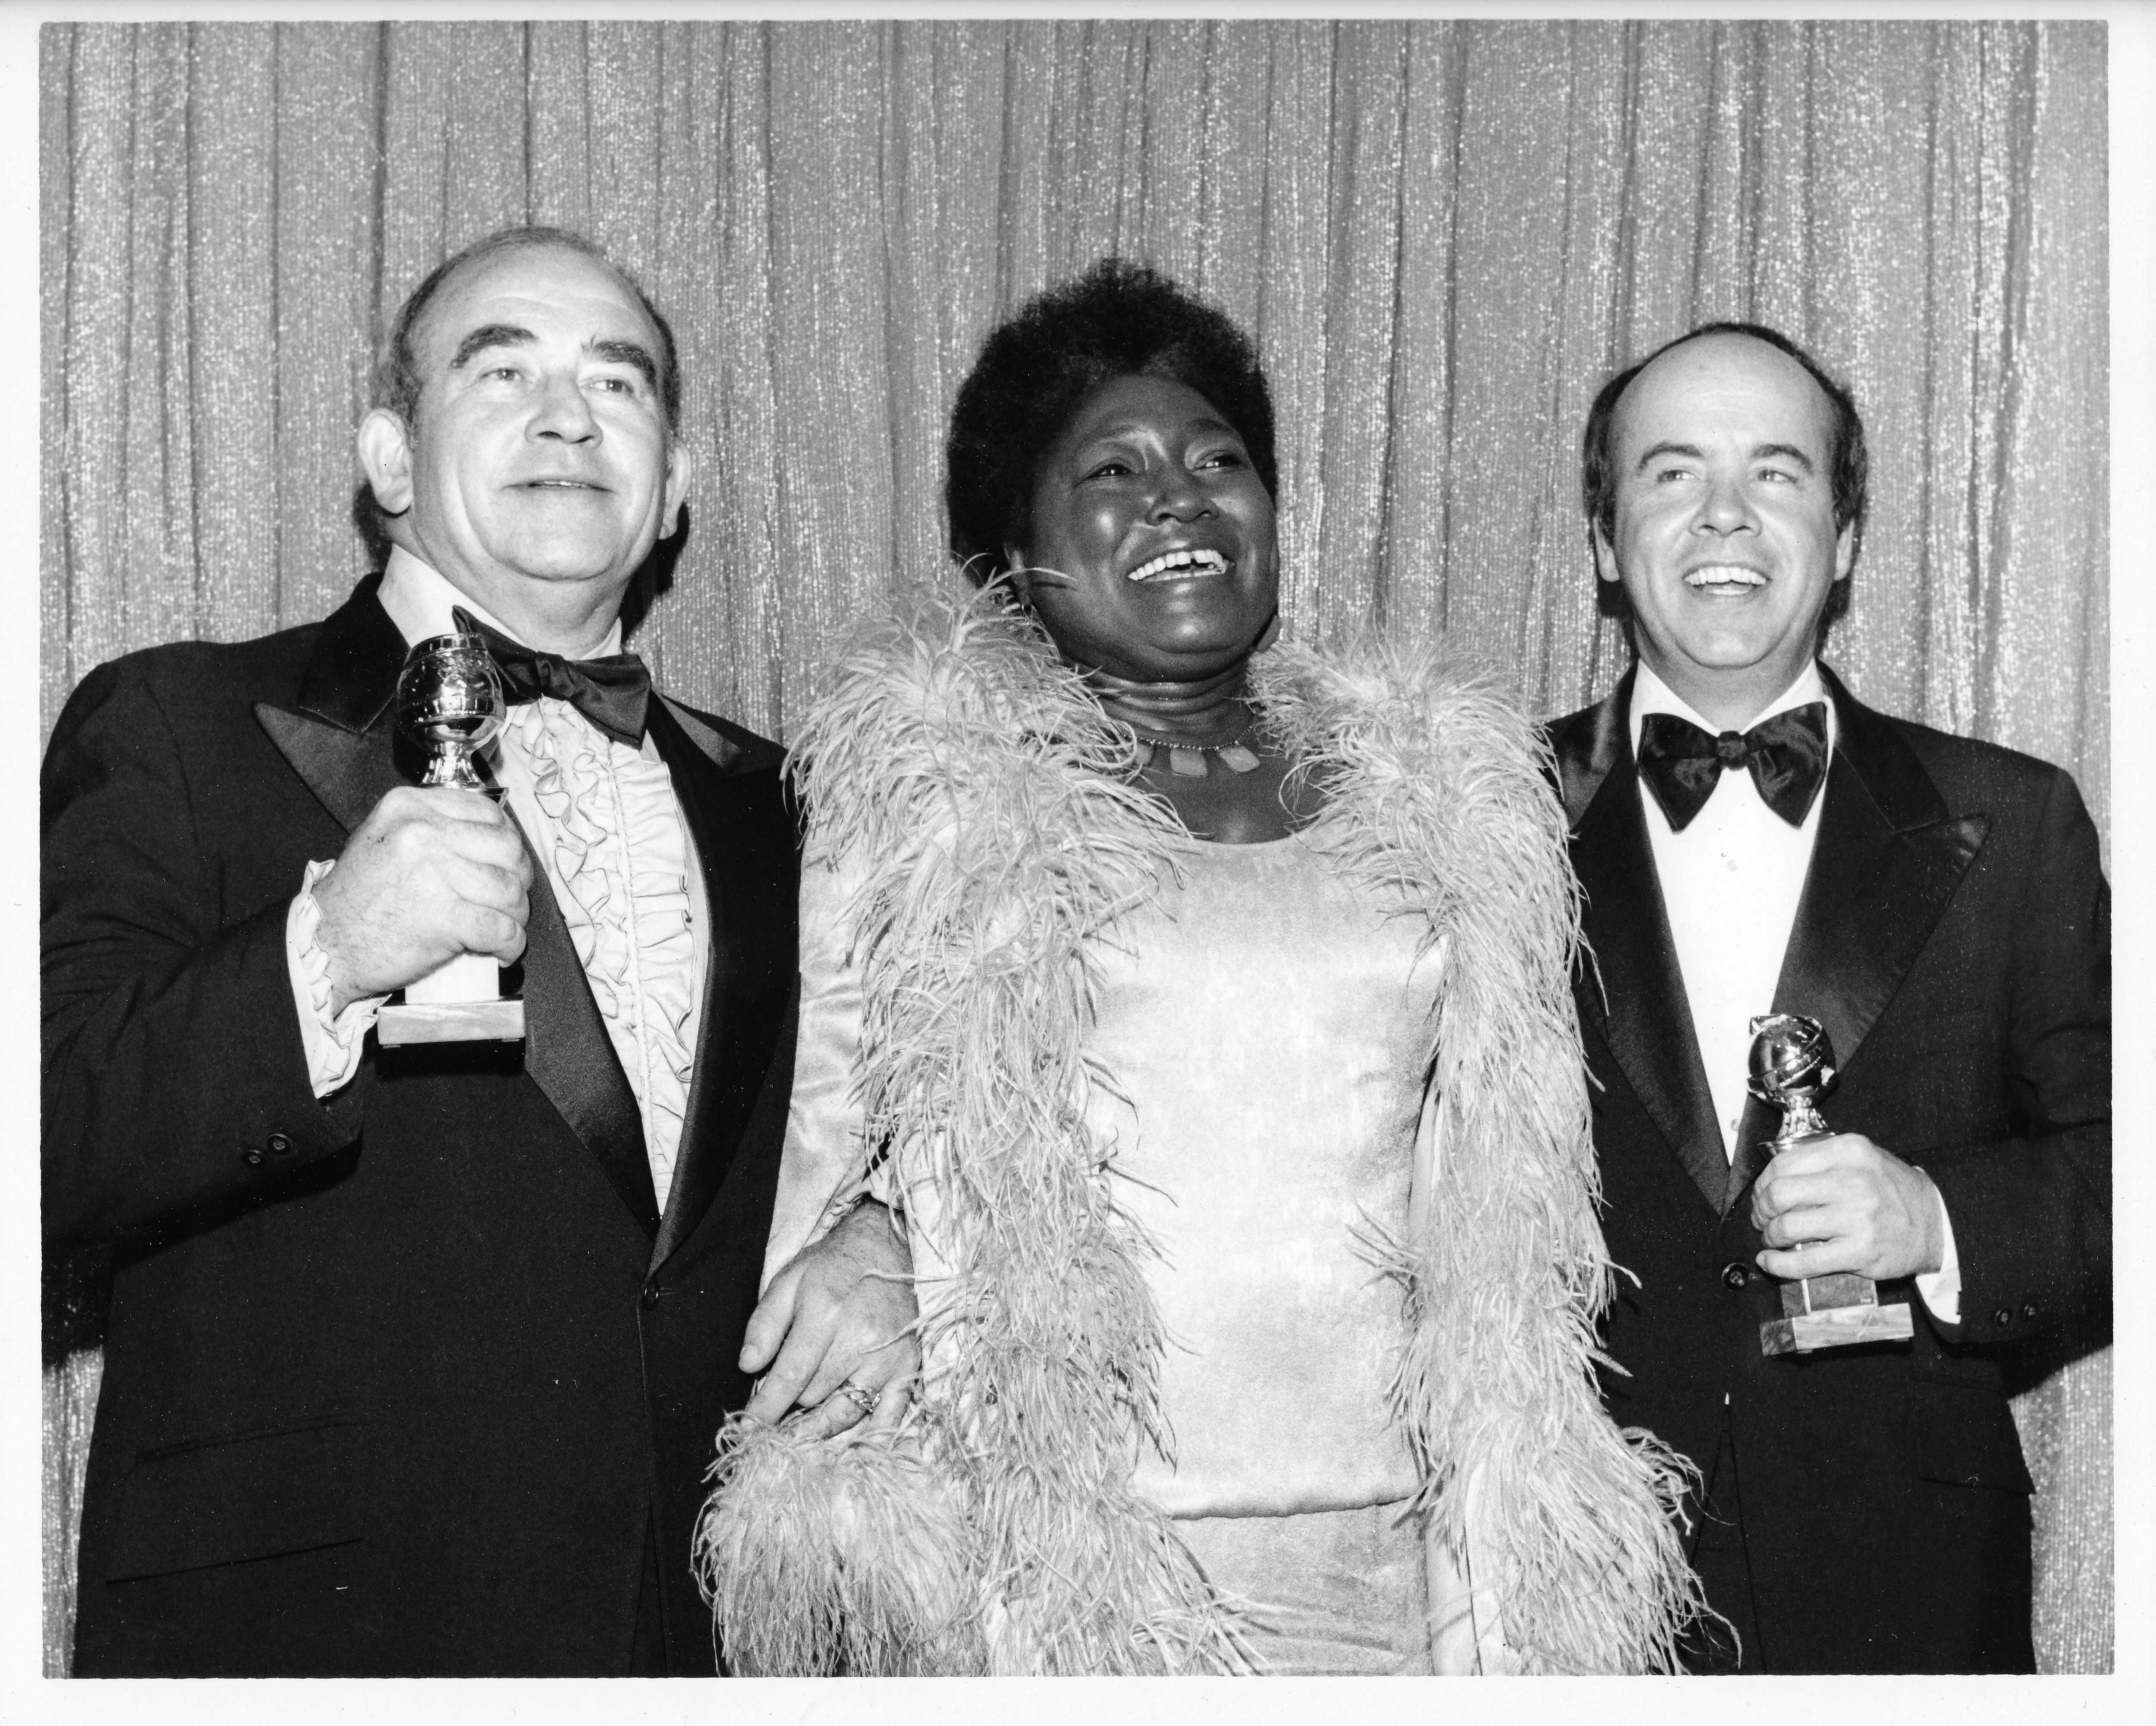 Ed Asner, Esther Rolle, Tim Conway